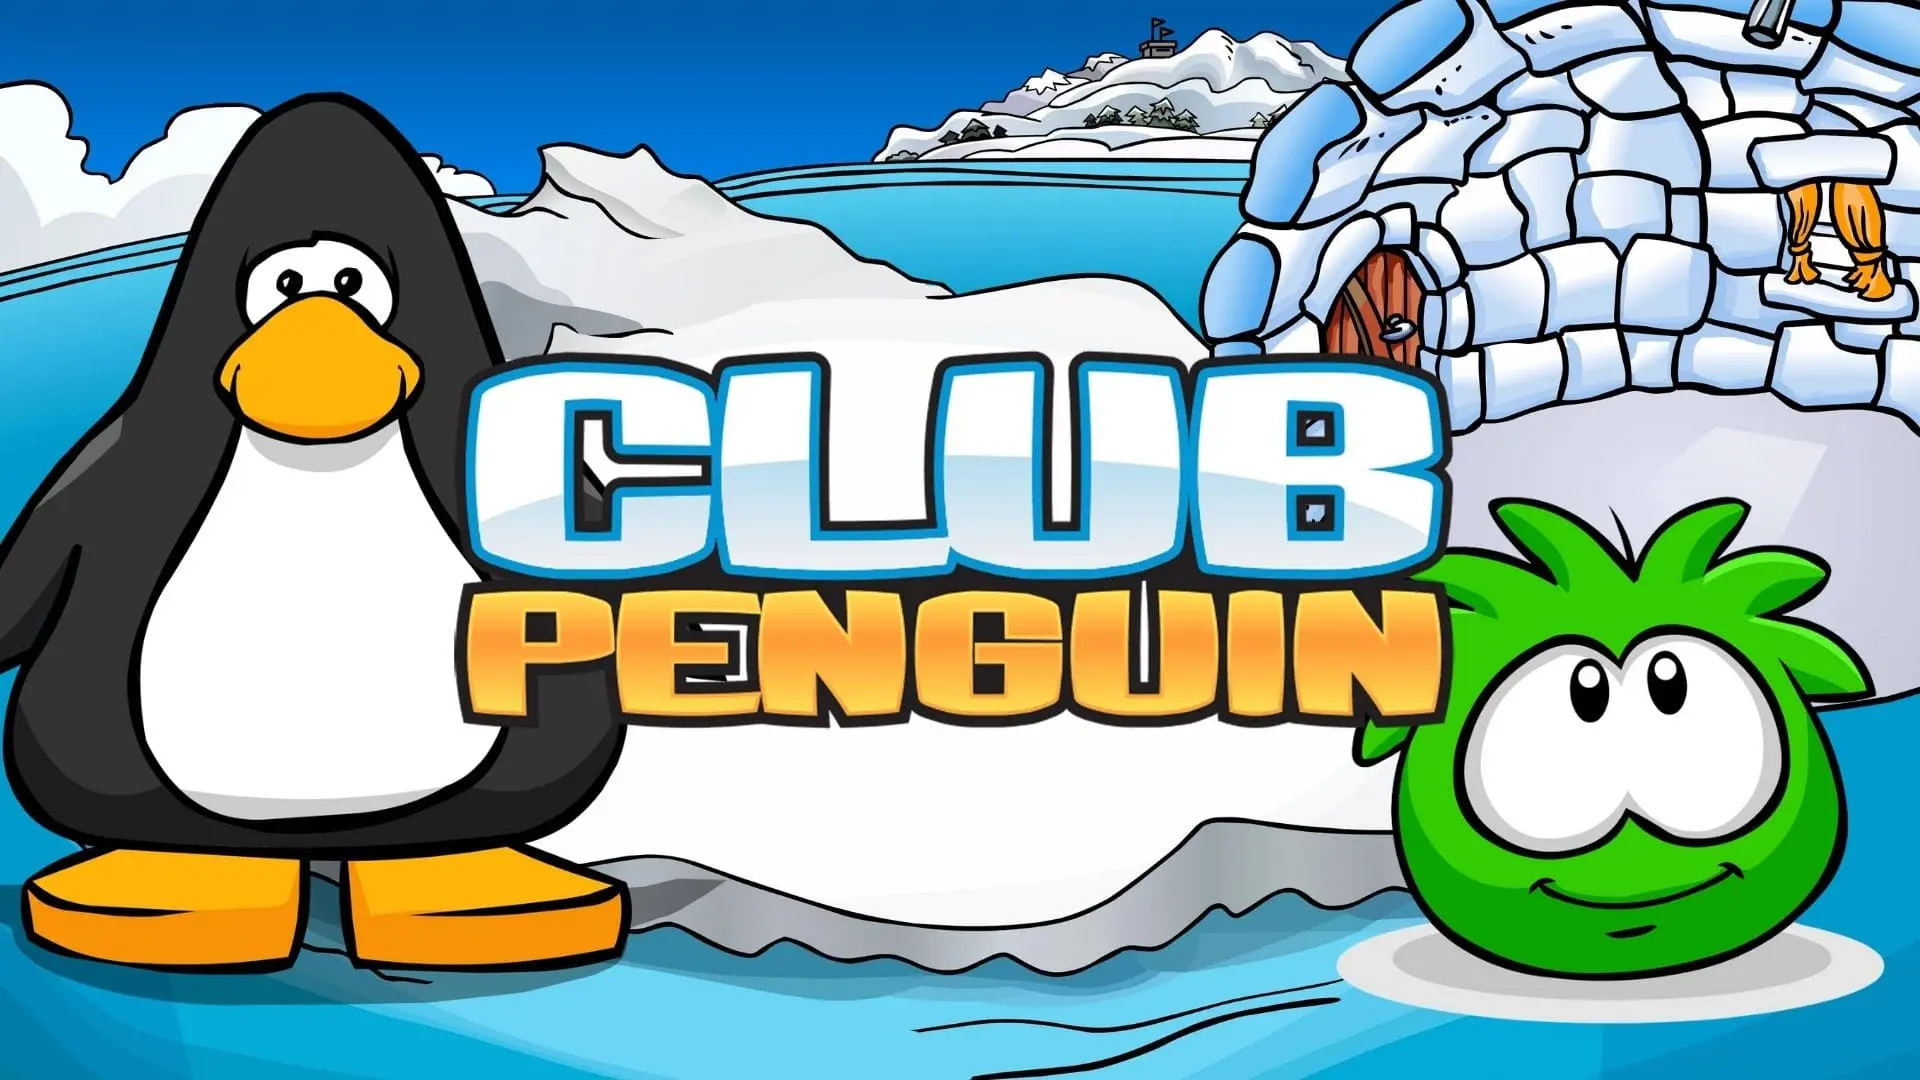 History Of Club Penguin - The Rise and Fall of Club Penguin: A Nostalgic Look Back At The Cult 2000s Game